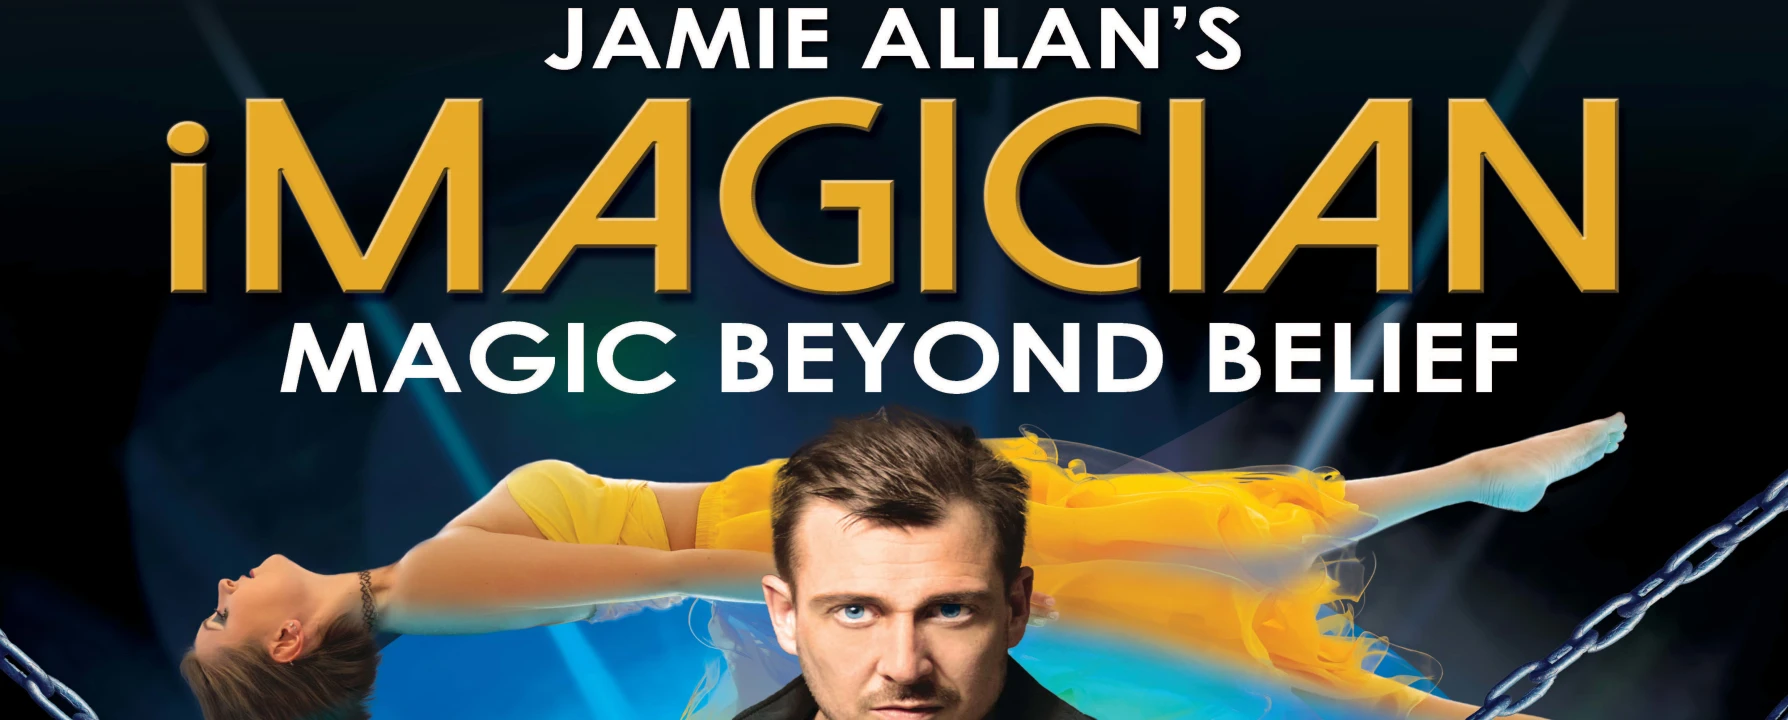 Jamie Allan’s iMagician Magic Beyond Belief: What to expect - 1